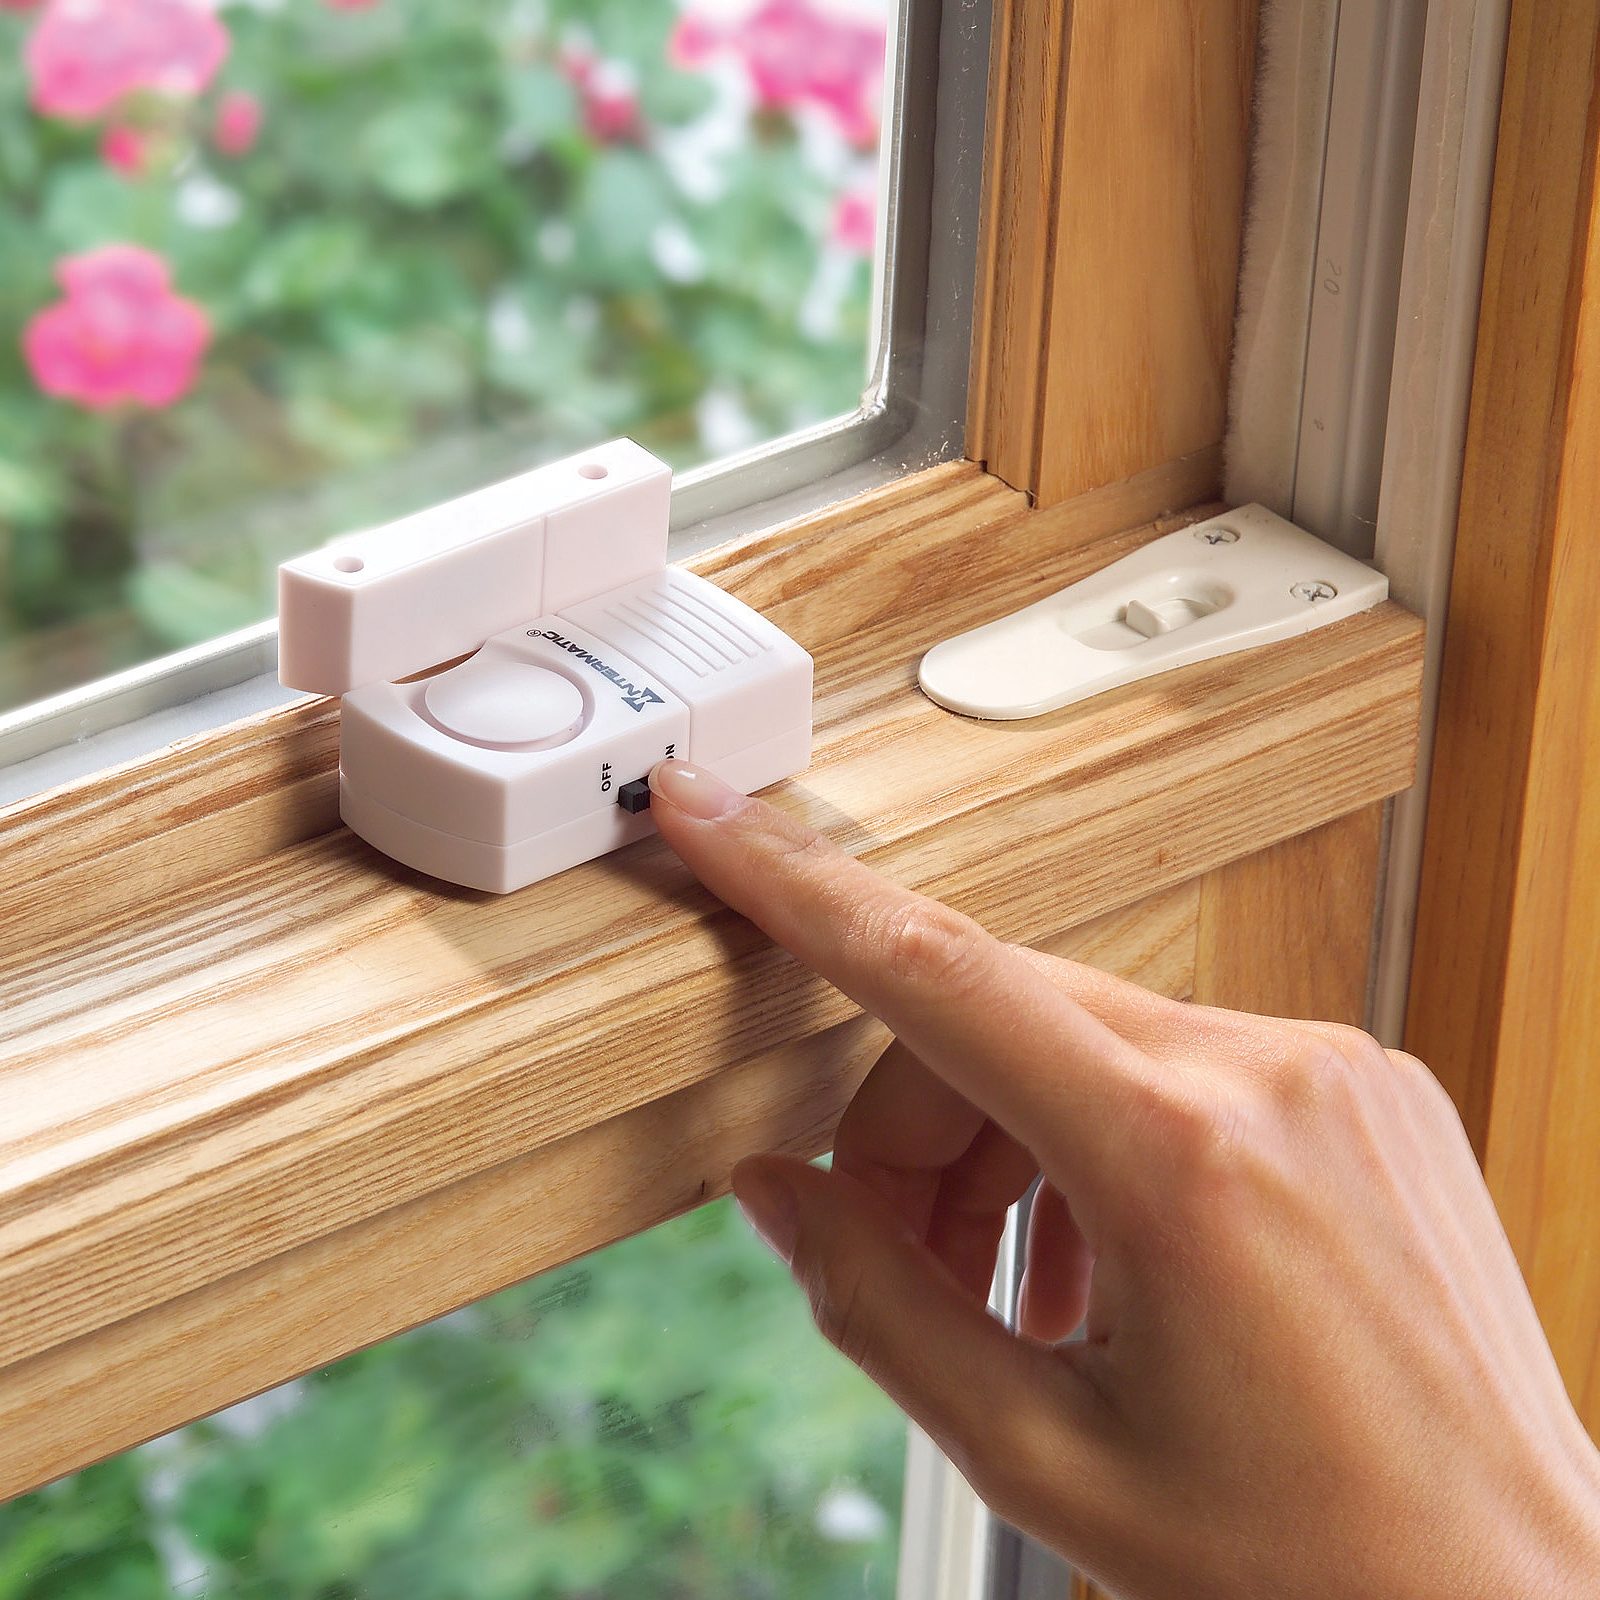 This door brace lock is what you need to boost your home security